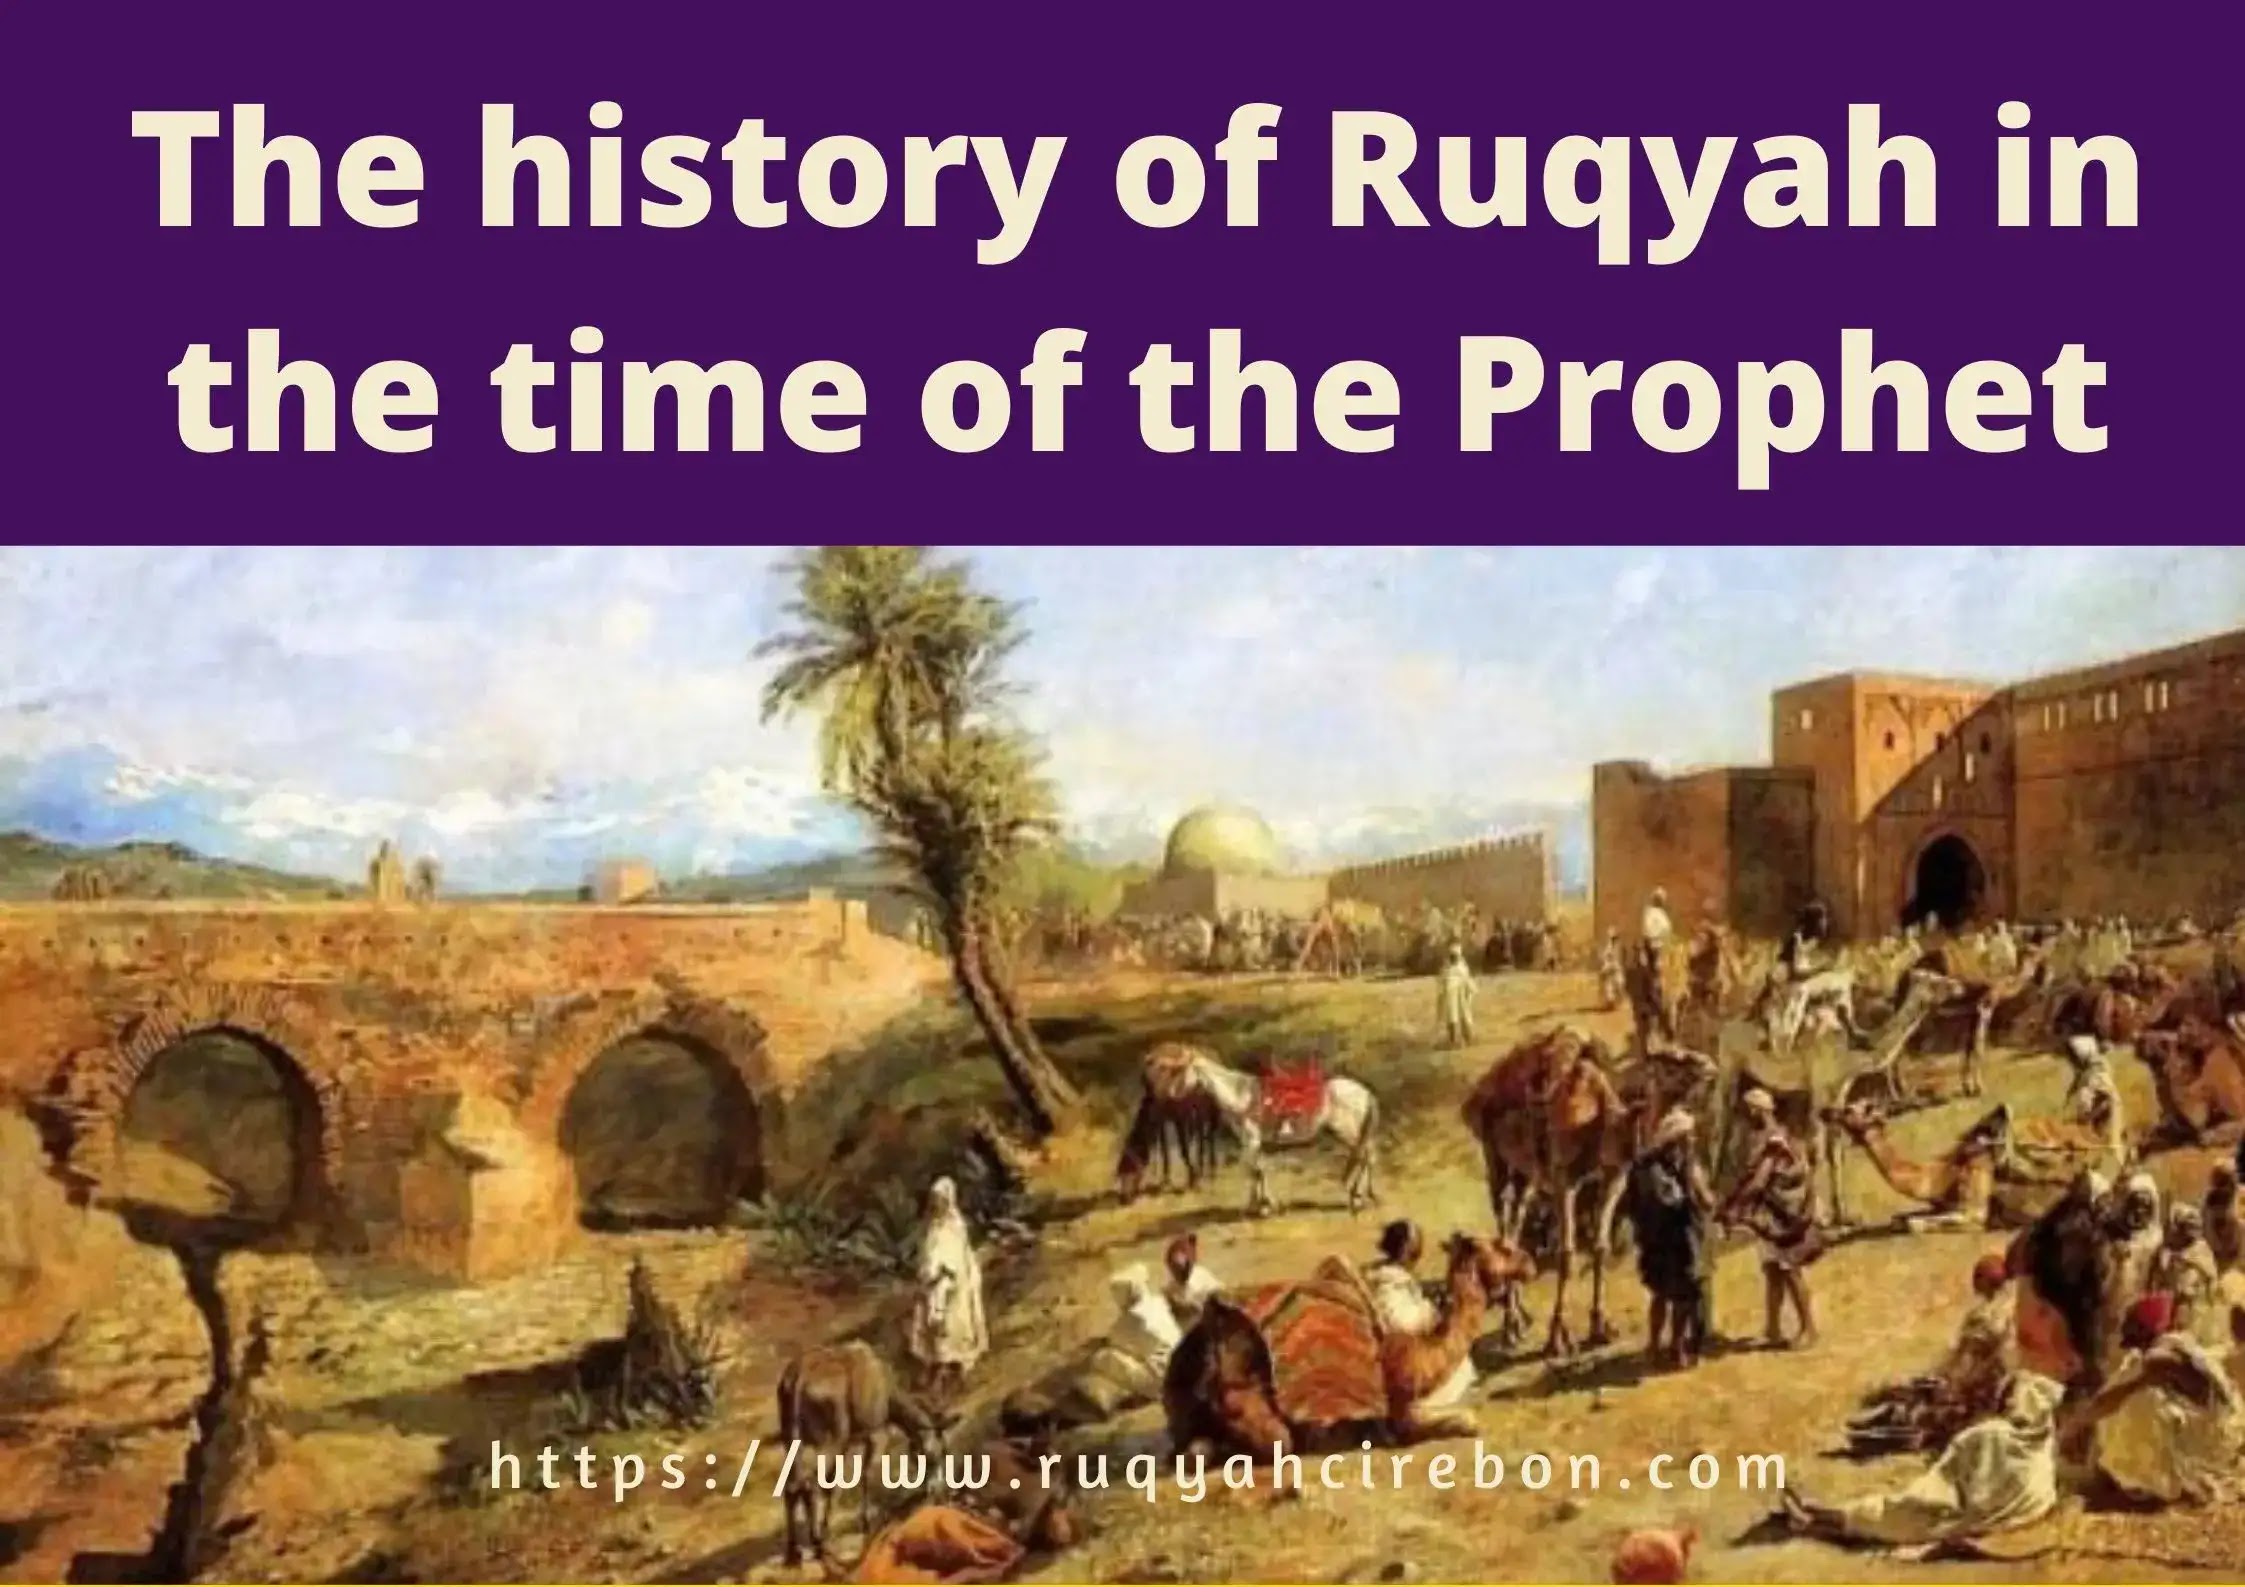 The history of Ruqyah in the time of the Prophet, is it still the same today?